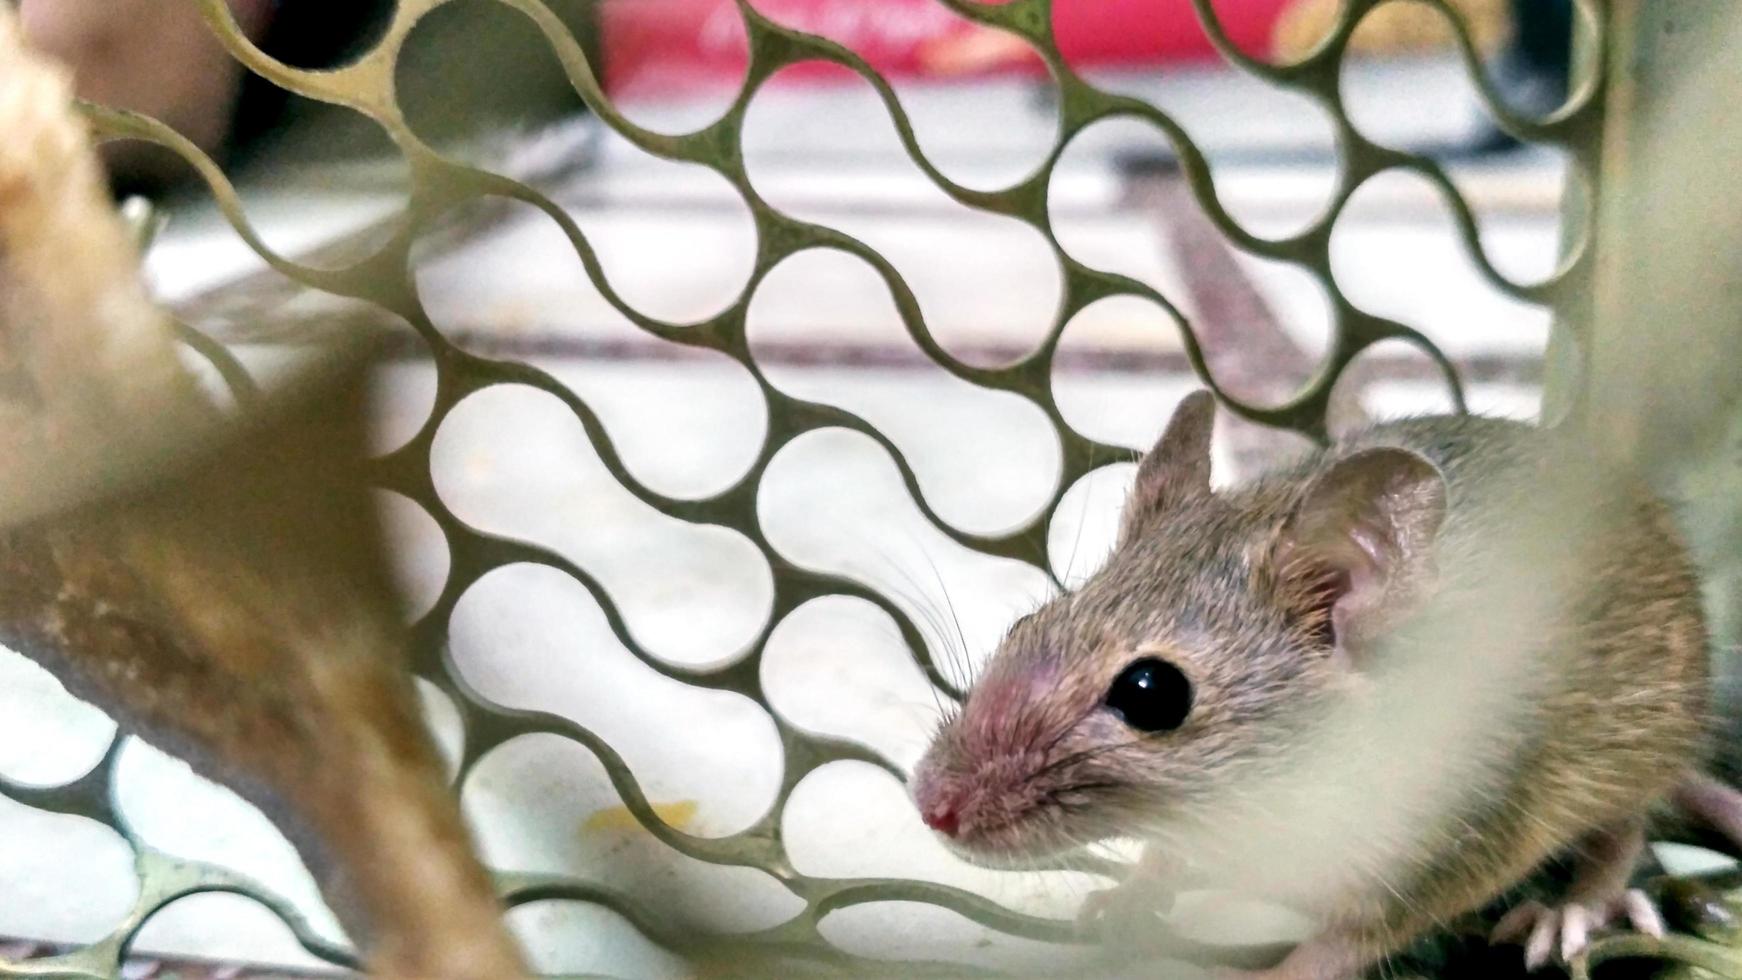 A small mouse trapped in a metal cage close-up shot photo